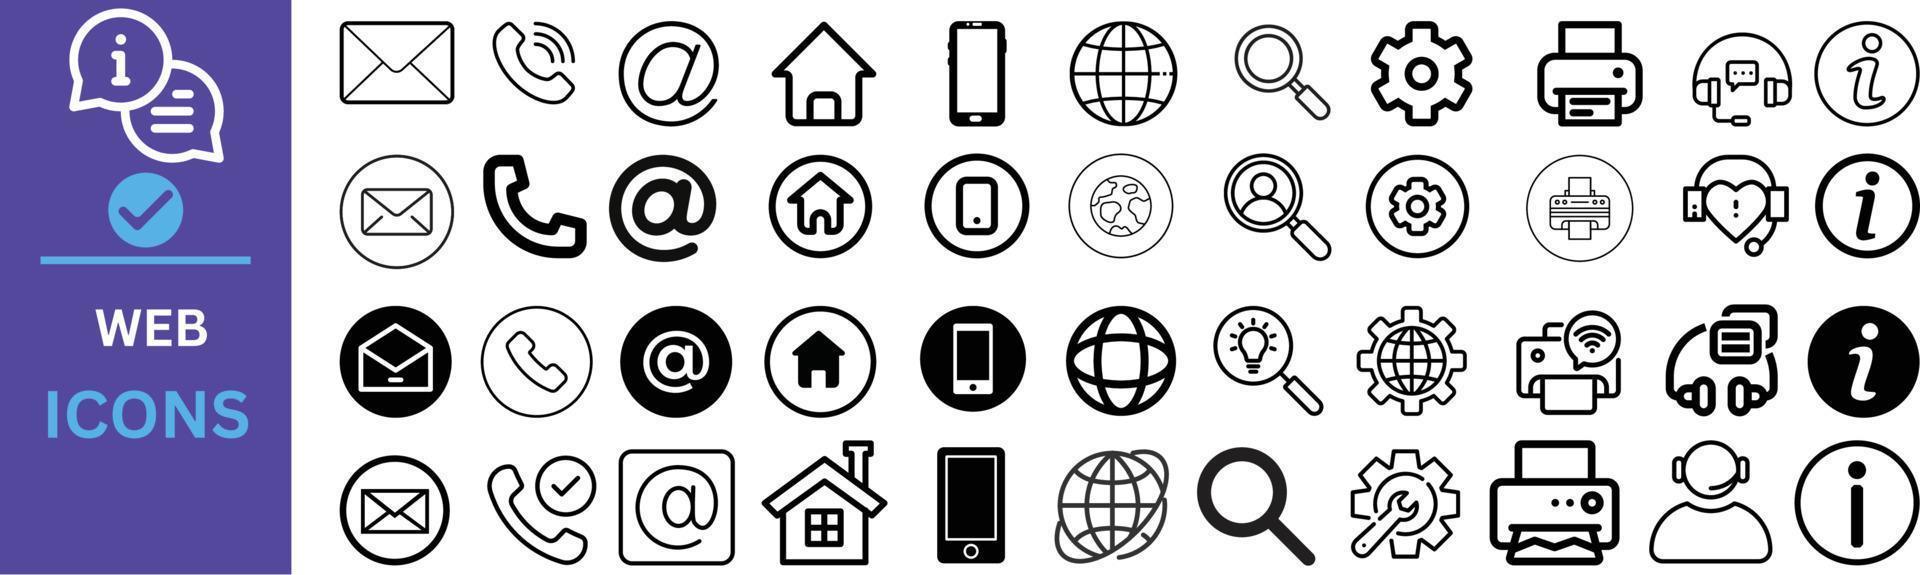 Contact icon set. Thin line Contact icons set. Contact symbols - Phone, mail, fax, info, e-mail, support... vector